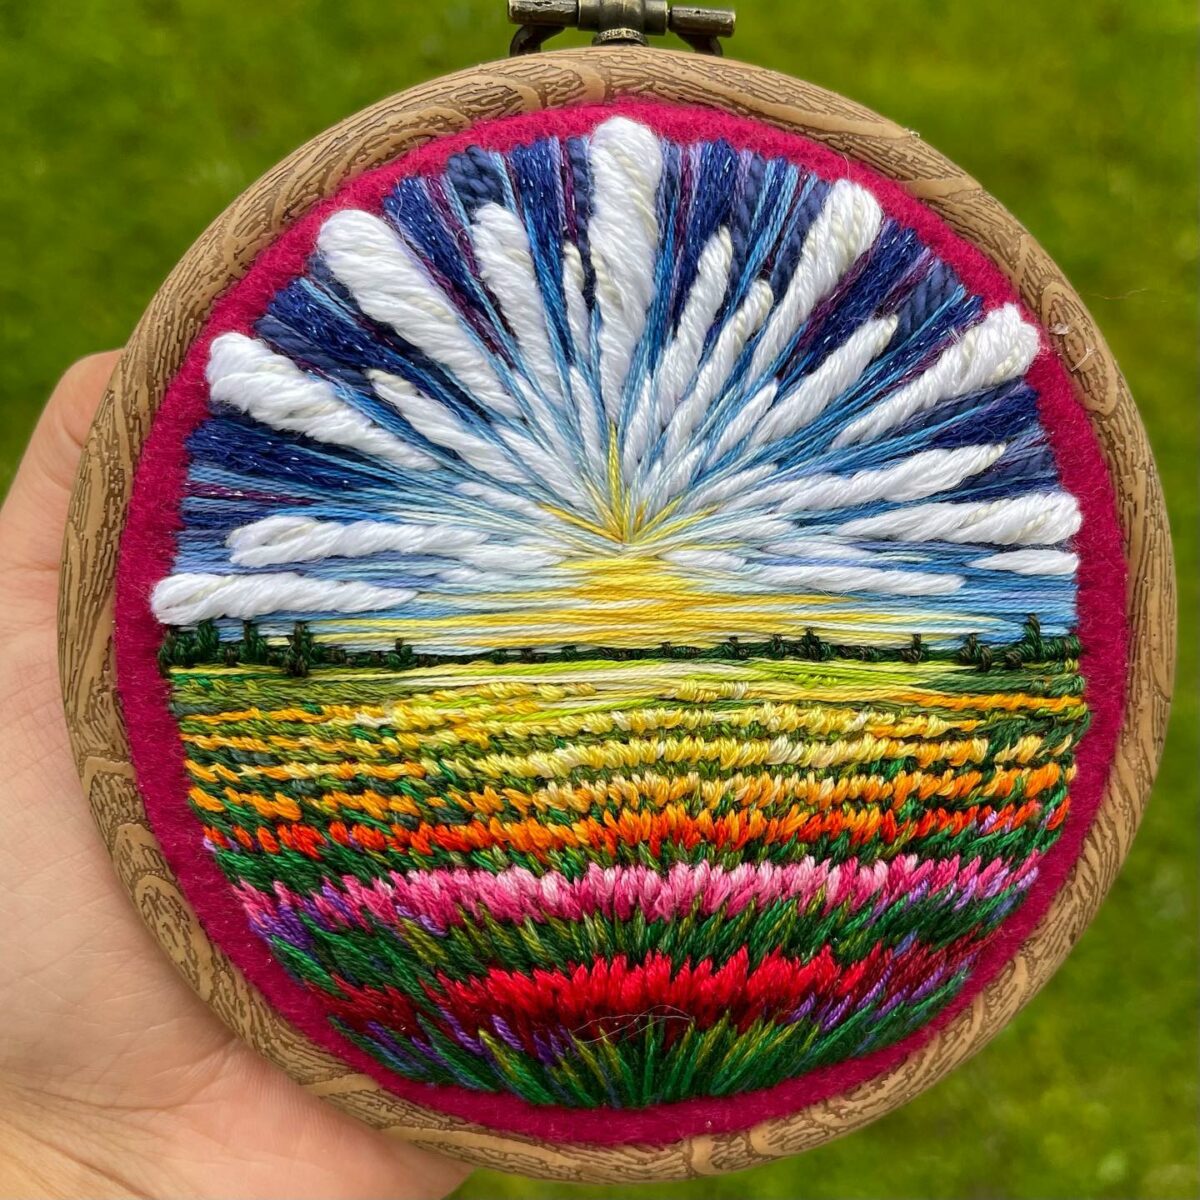 Gorgeous Embroidery Hoop Arts Of Natural Landscapes By Sew Beautiful 5